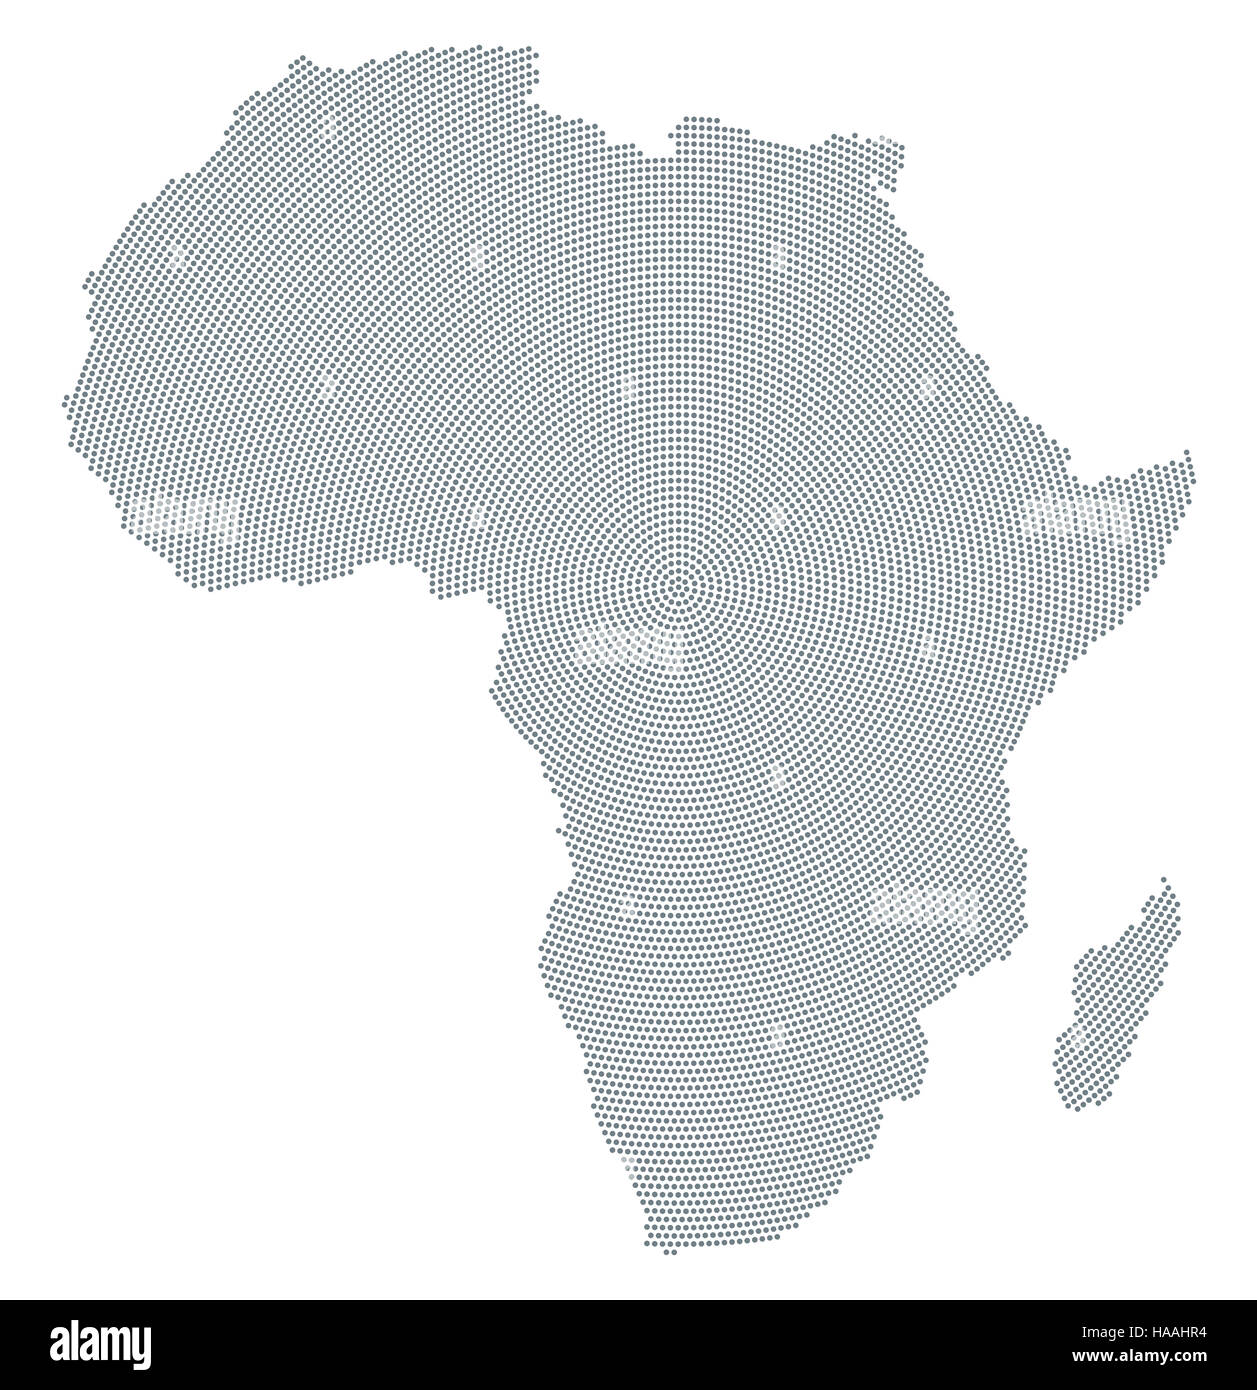 Africa map radial dot pattern. Gray dots going from the center outwards forming the silhouette of the African continent. Stock Photo